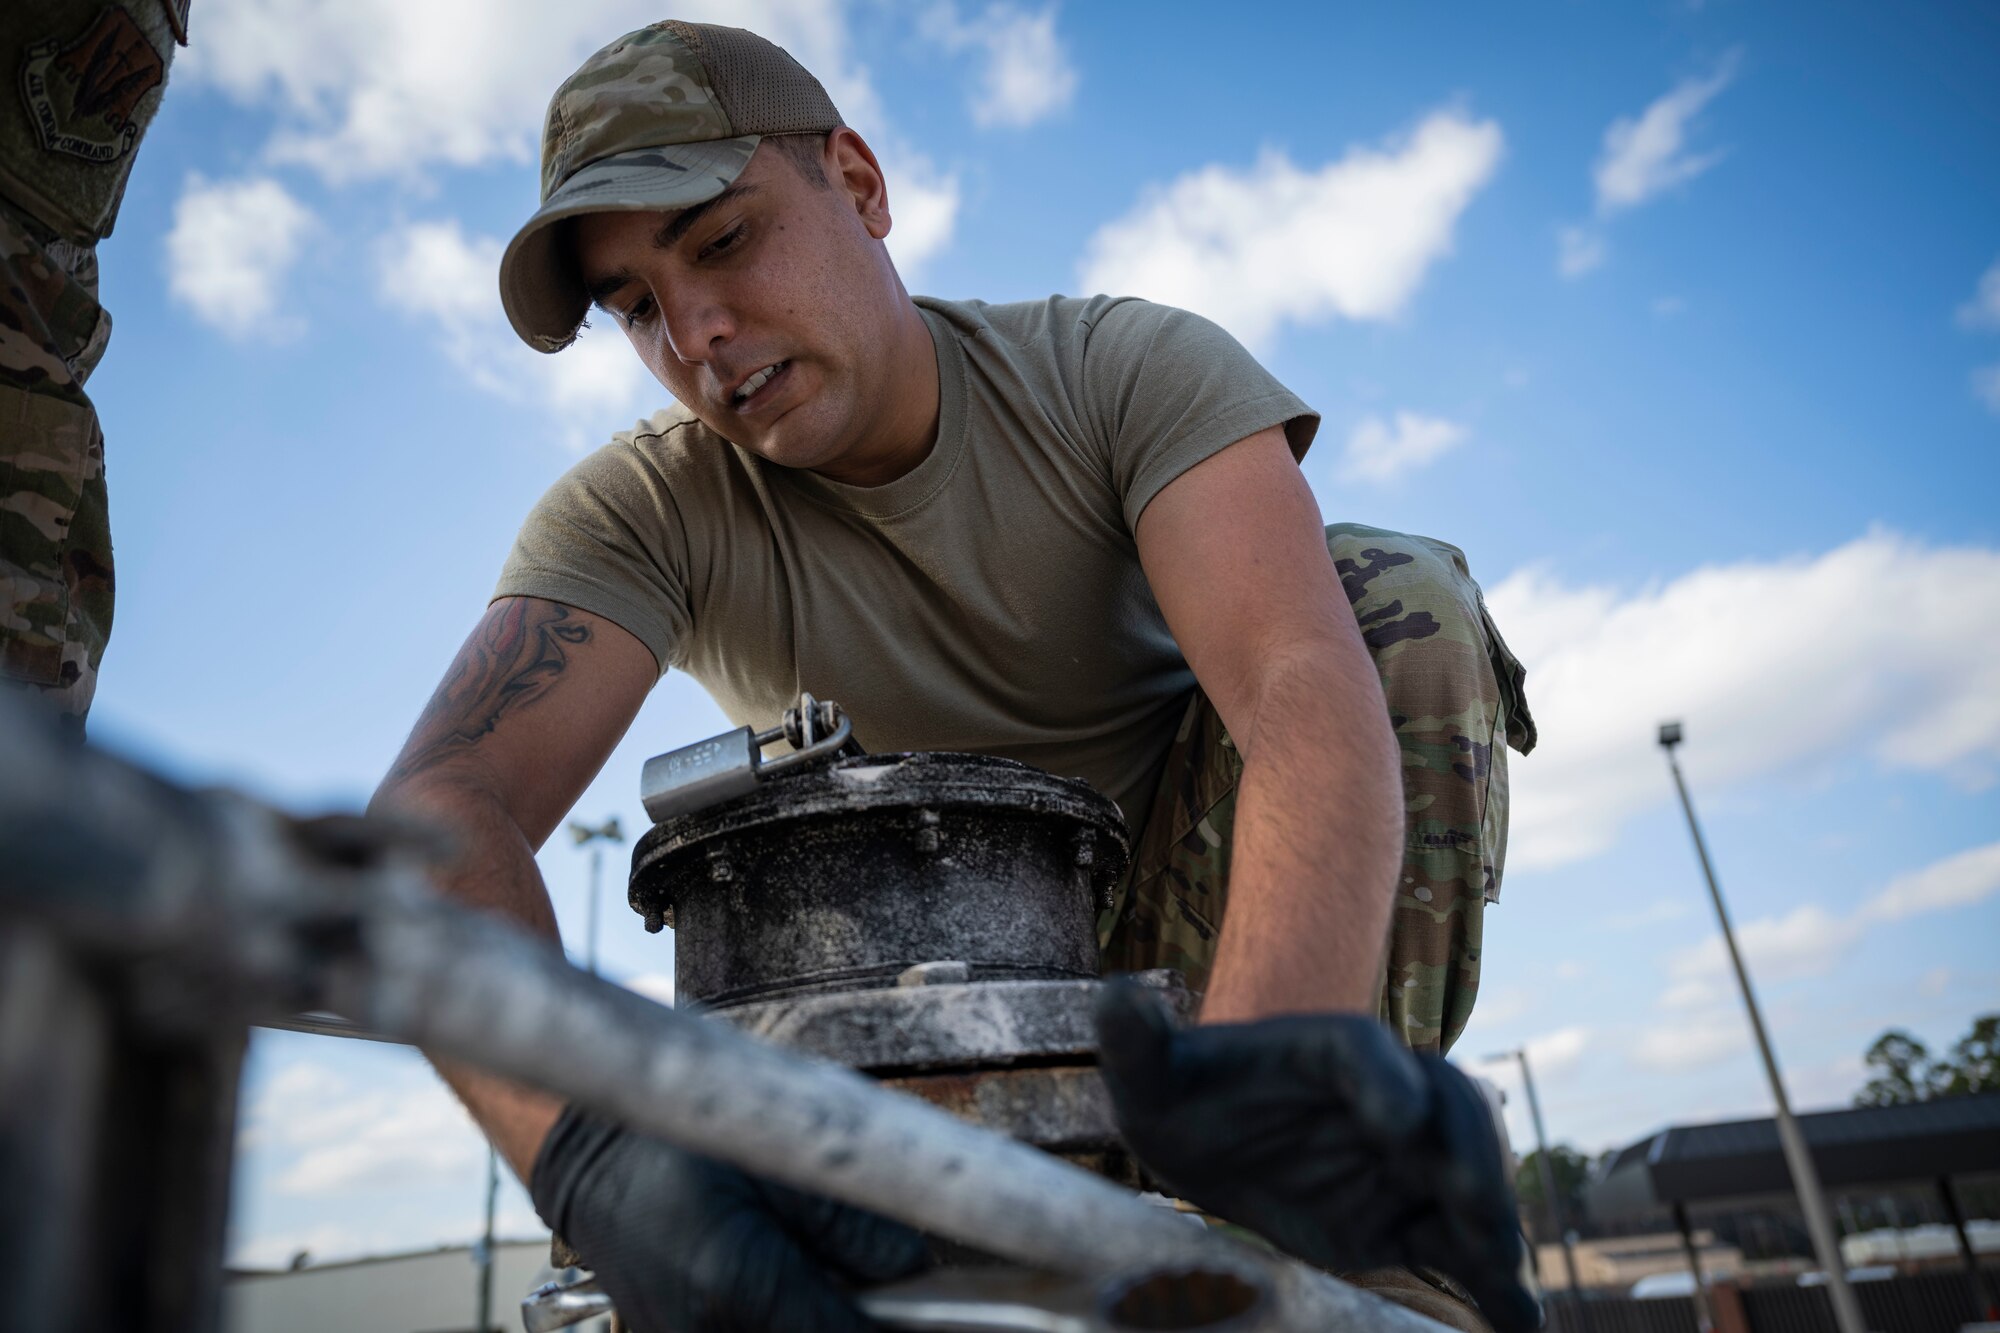 Senior Airman Justin Bellivan, 4th Civil Engineer Squadron liquid fuels maintenance technician, replaces an emergency vent on a fuel tank at Seymour Johnson Air Force Base, North Carolina, Dec. 13, 2022. Emergency vents open up to help prevent excess pressure build up in fuel tanks.